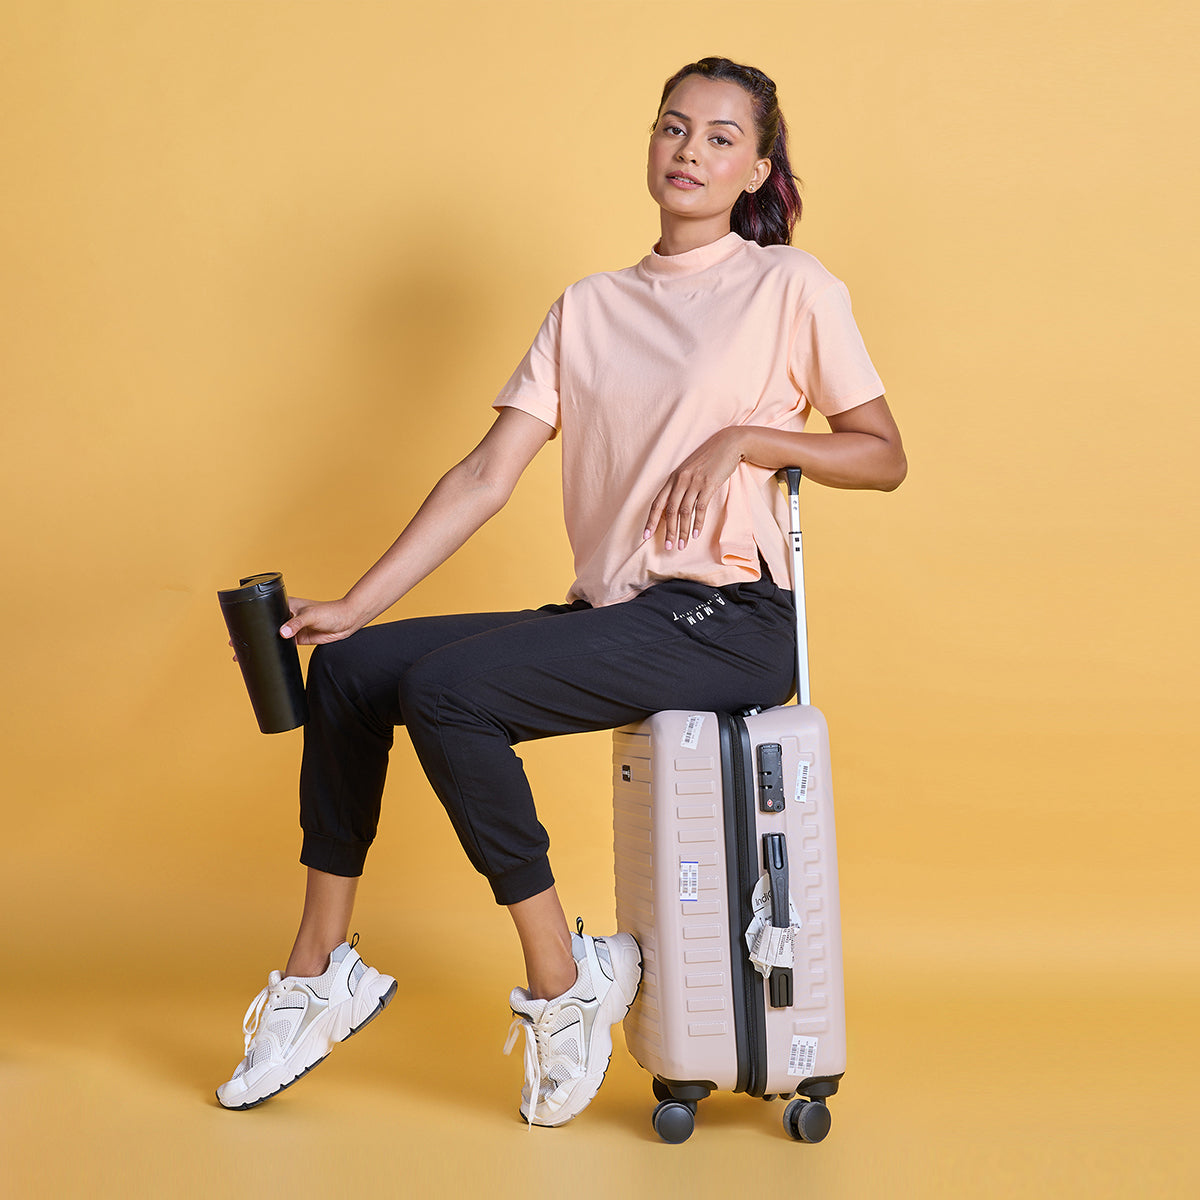 Nykd All Day Iconic Cotton Boxy Tee - NYLE276 - Peach parfait